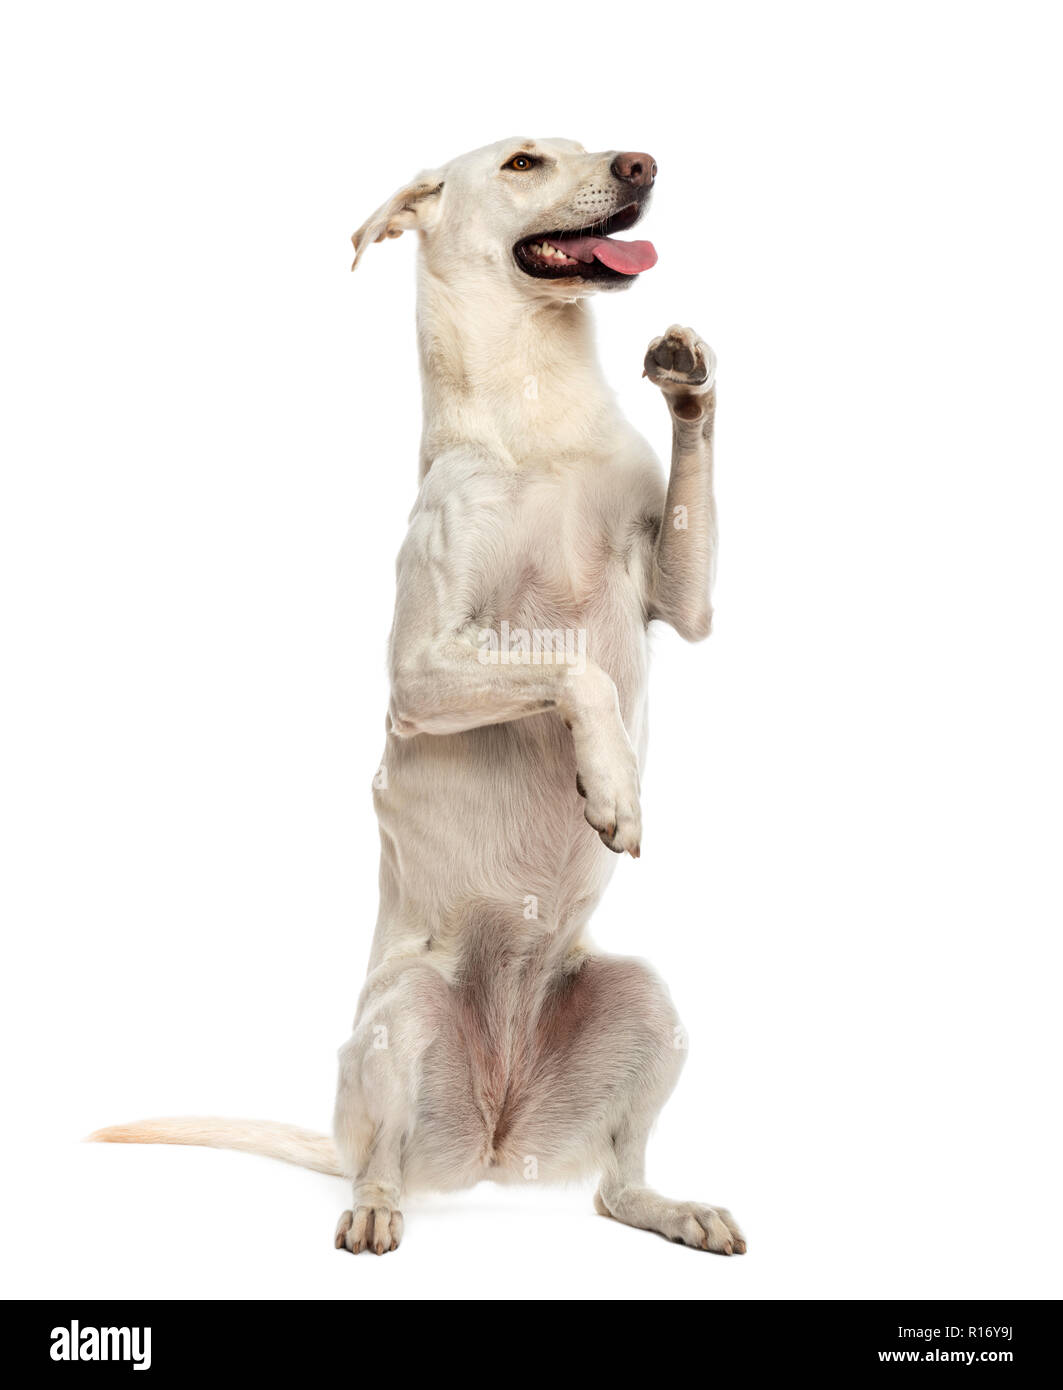 Crossbreed dog standing on hind legs against white background Stock Photo